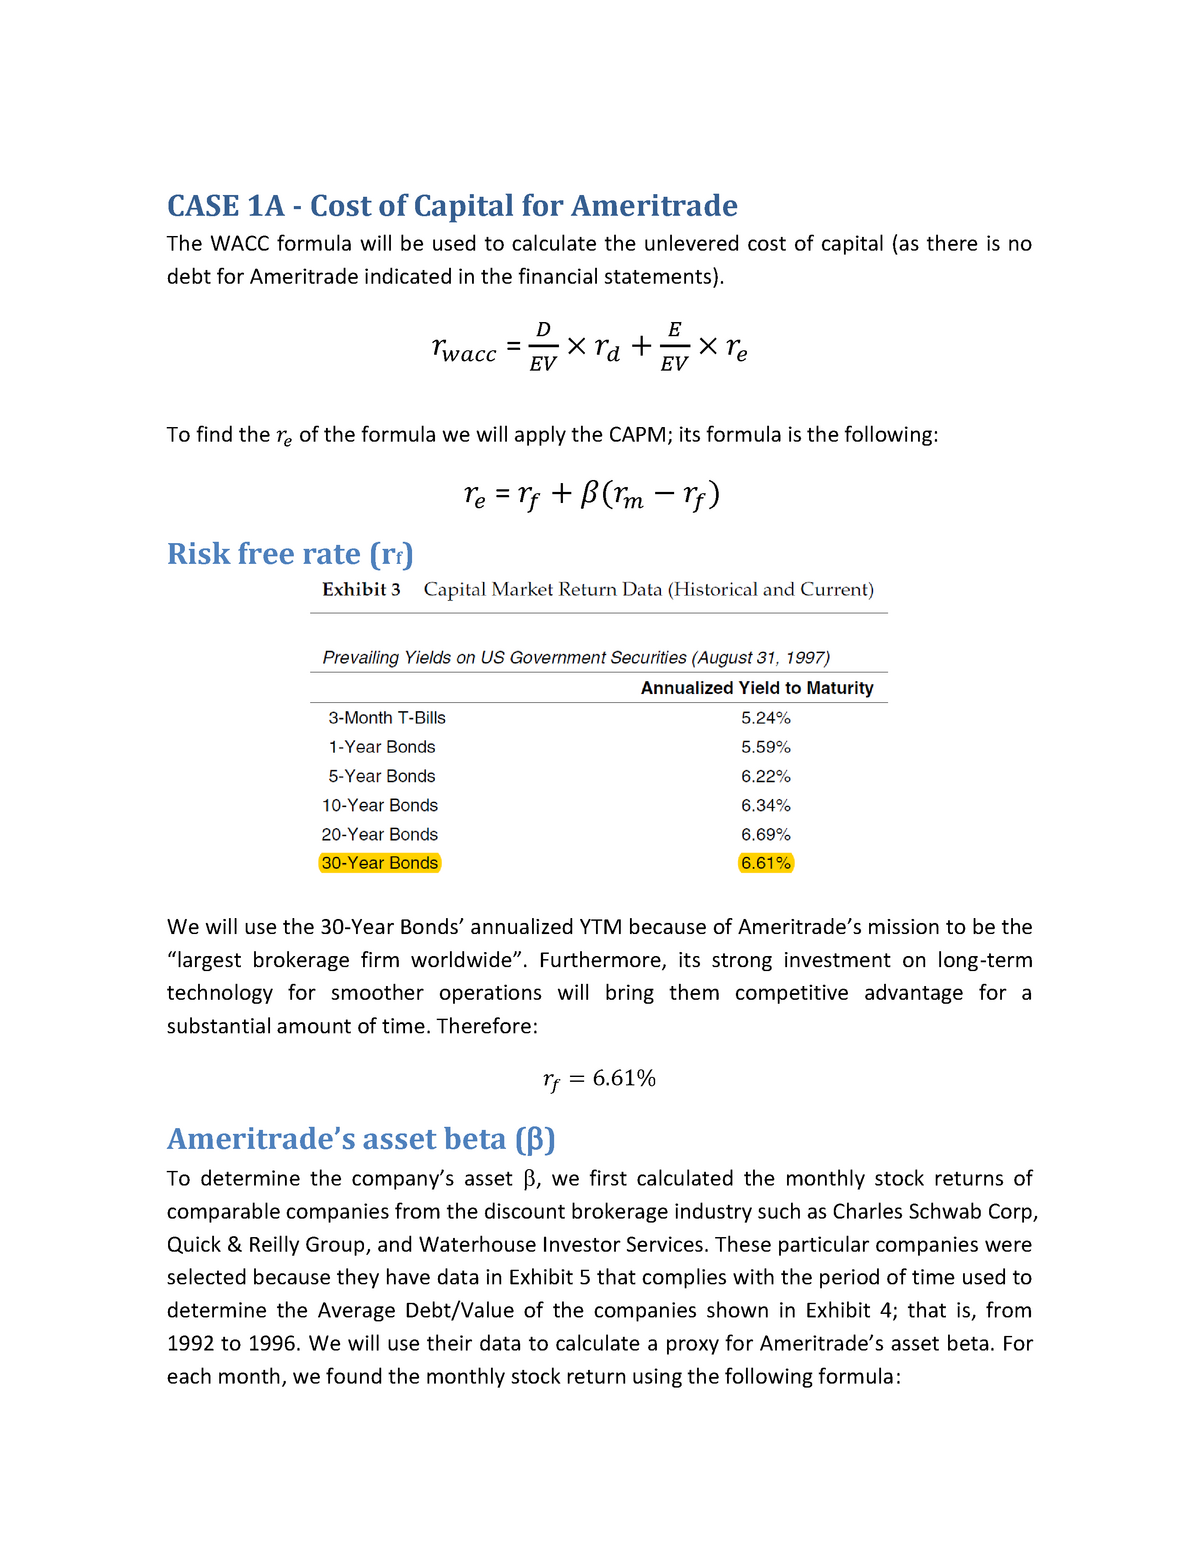 cost of capital at ameritrade solution